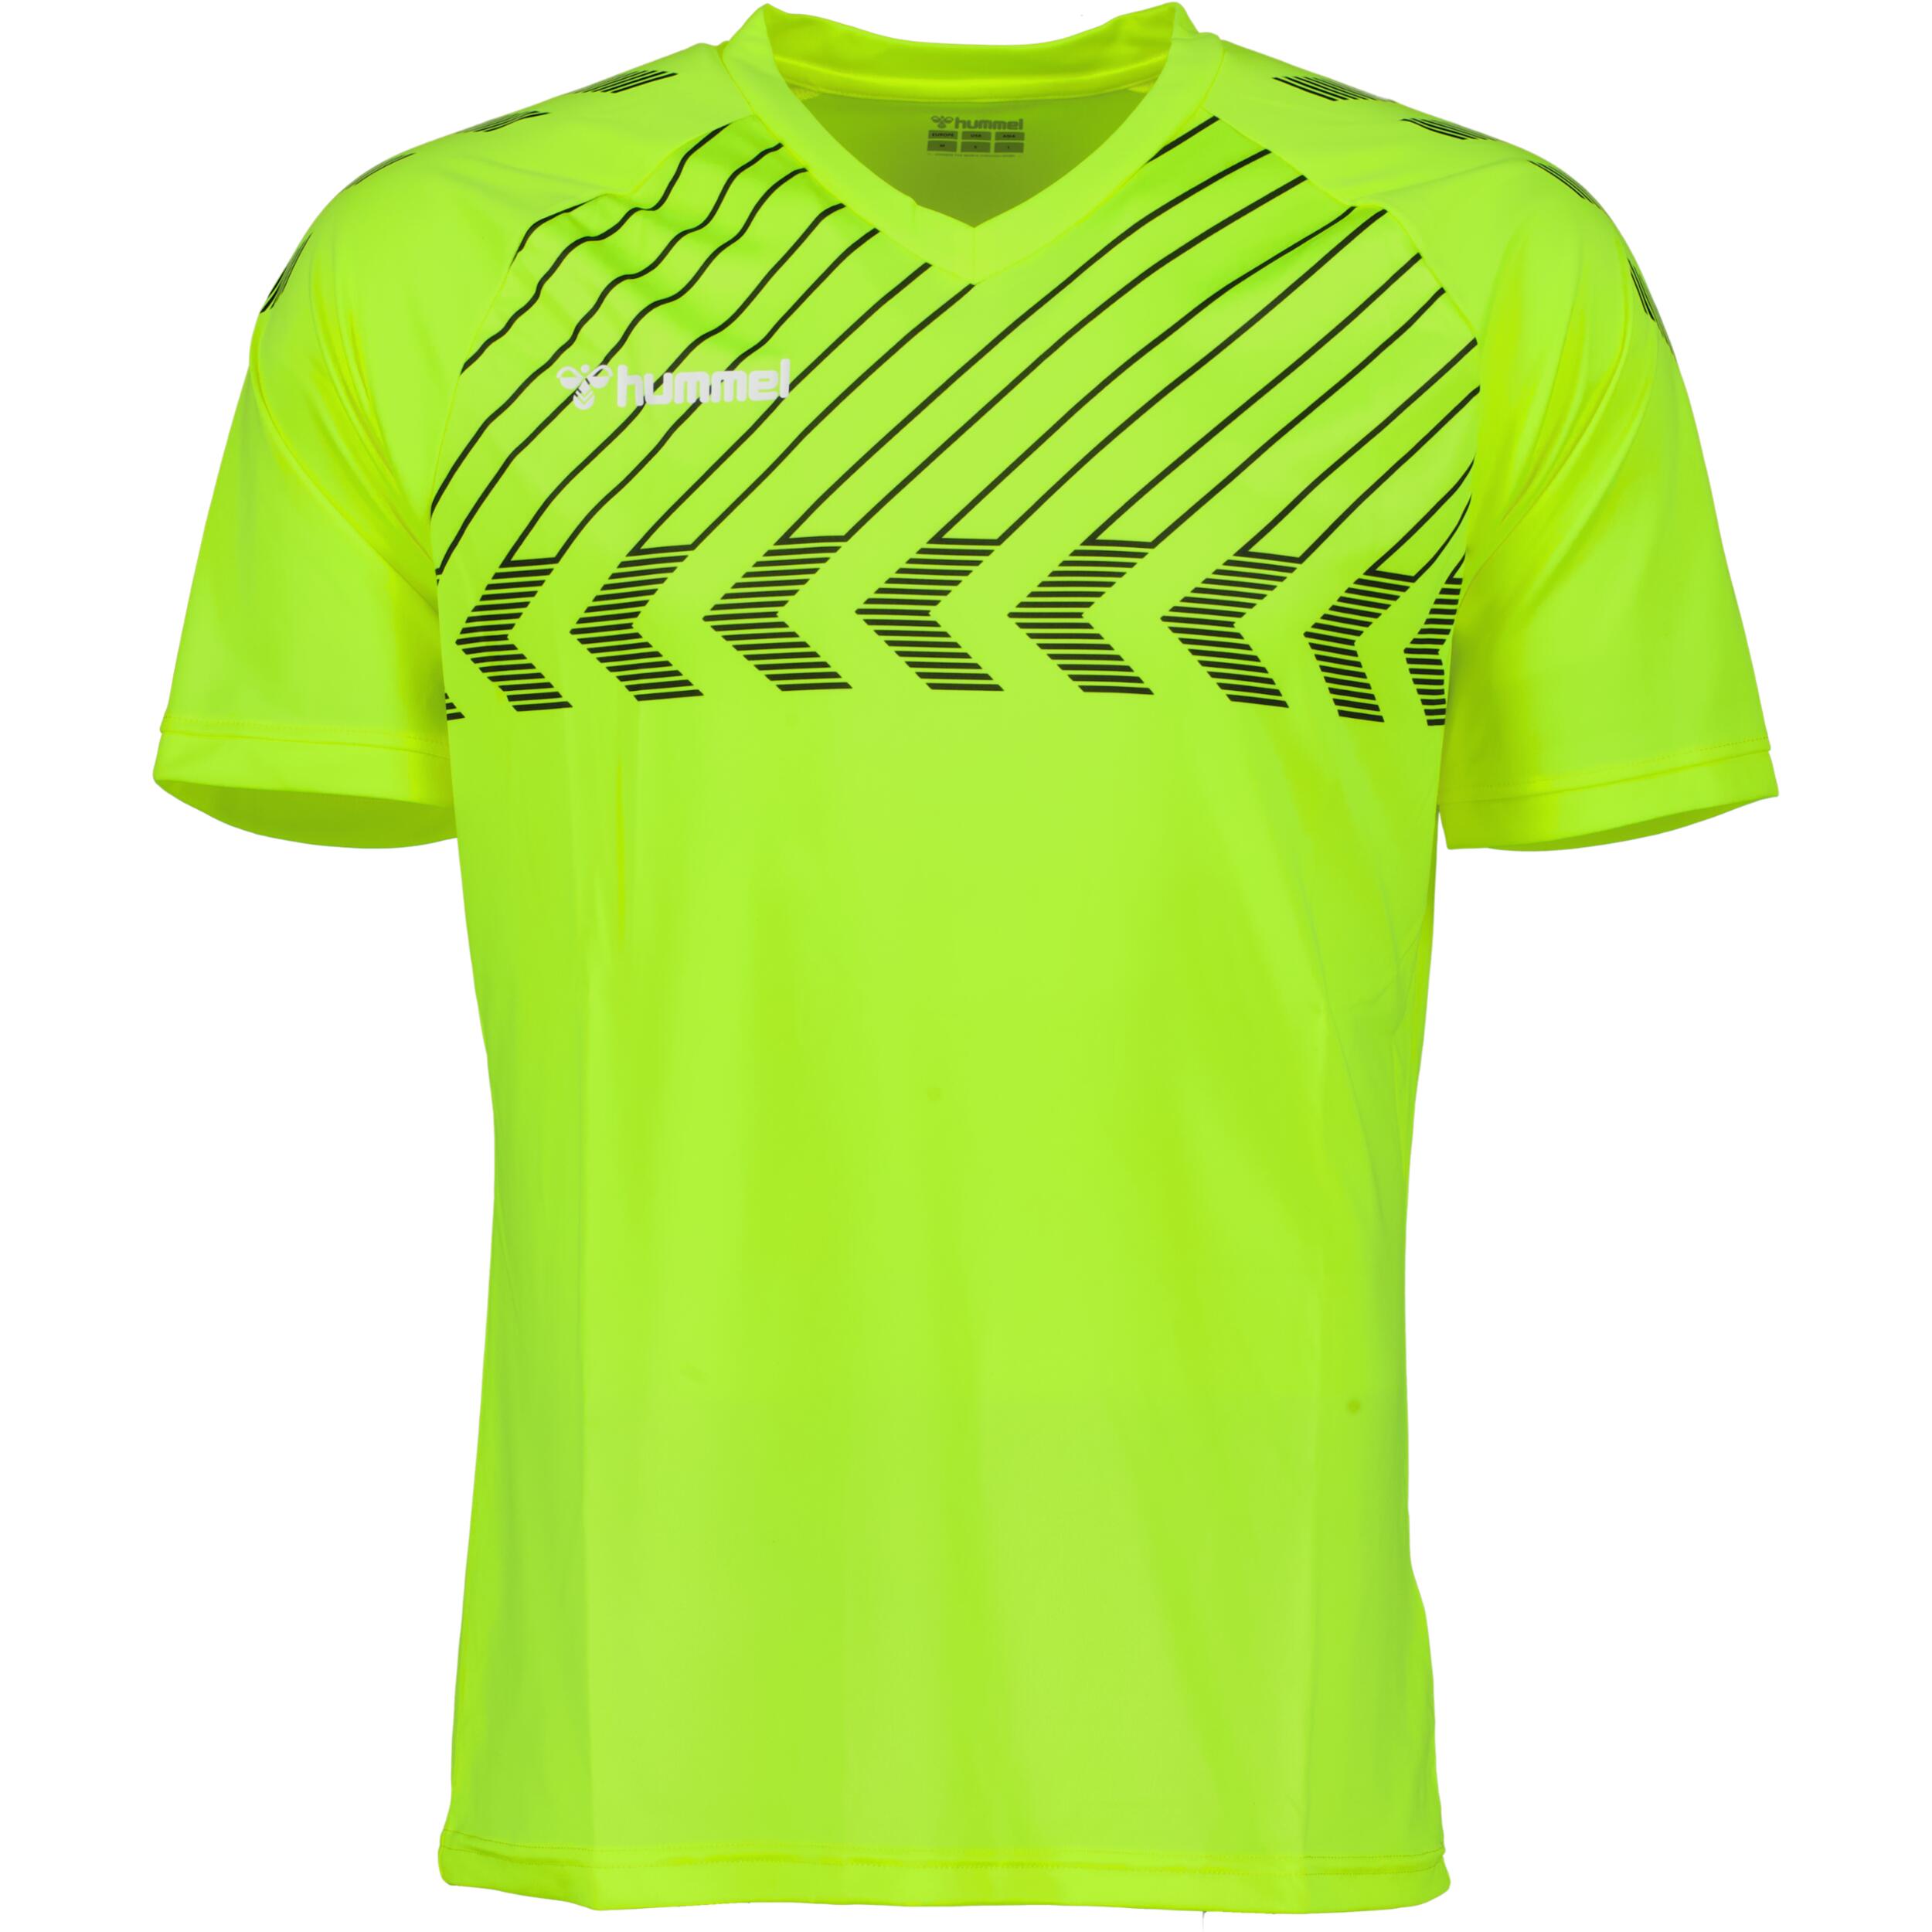 Poly jersey for men, great for football, in safety yellow 1/3